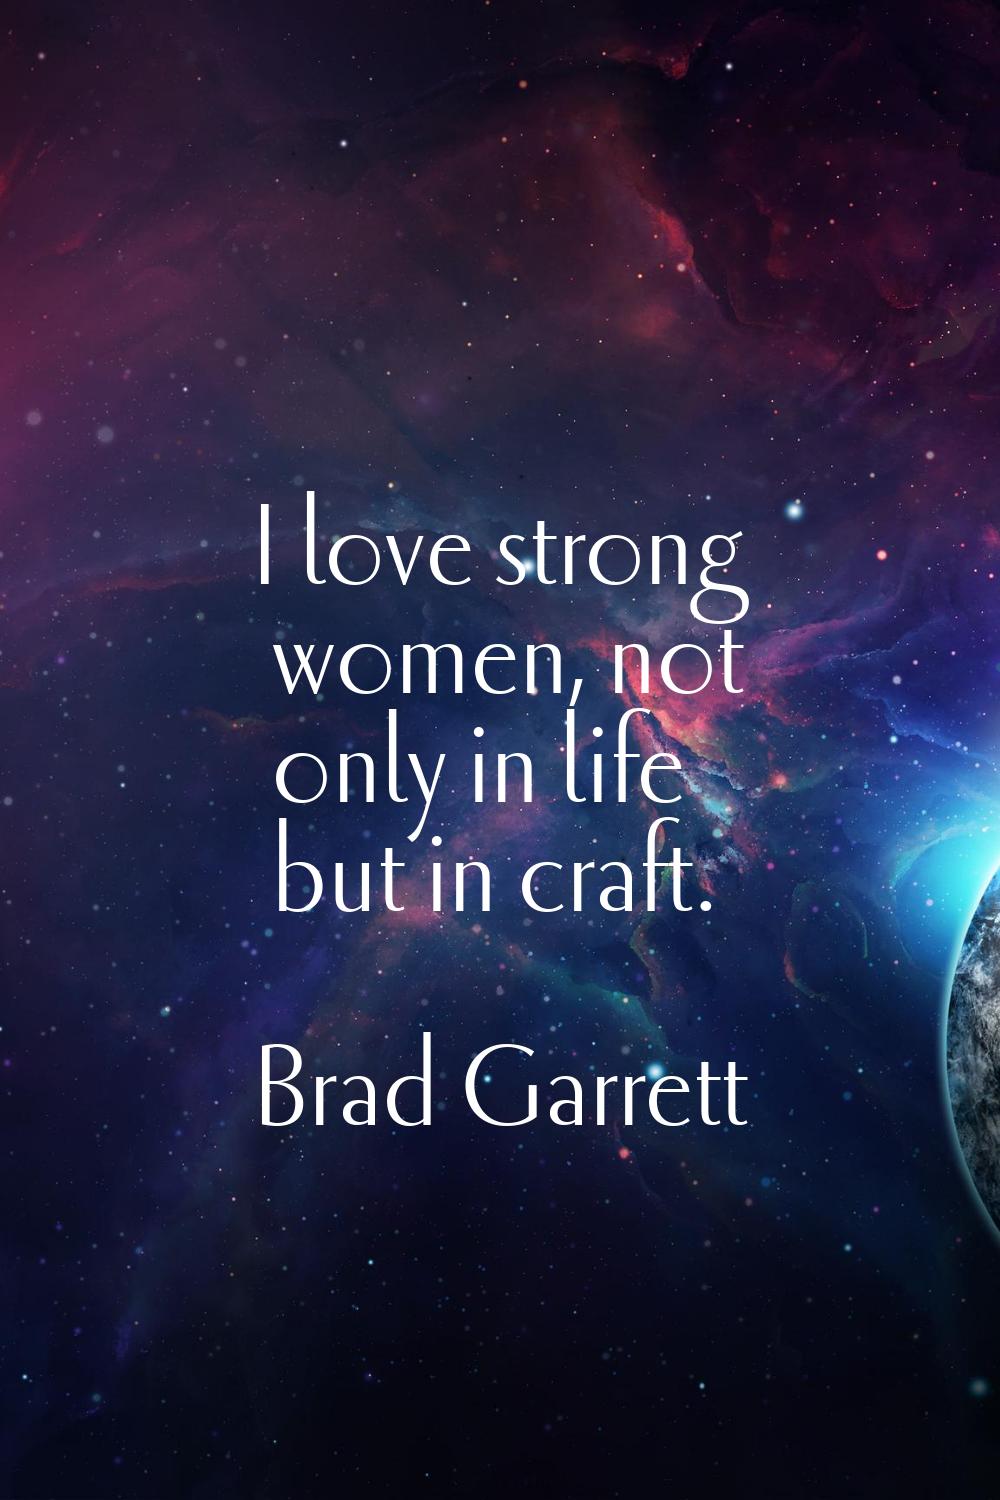 I love strong women, not only in life but in craft.